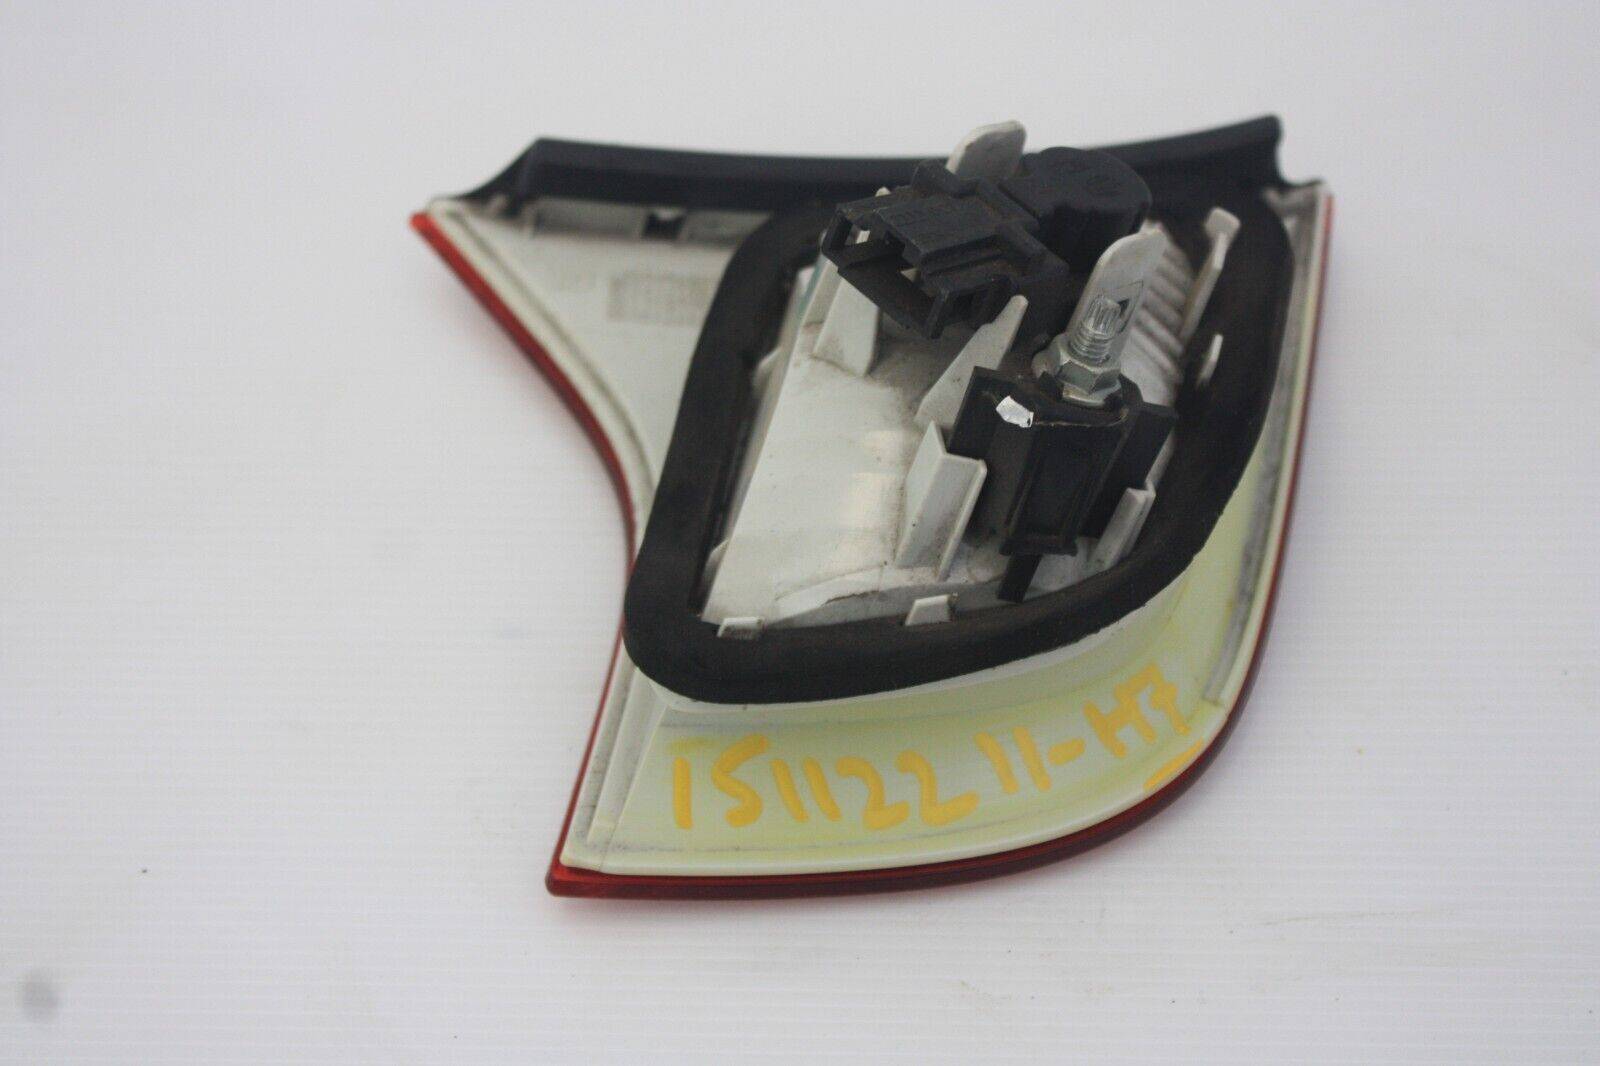 Audi-A4-B7-Right-Side-Tail-Light-2005-TO-2008-8E5945094A-Genuine-175491221880-8